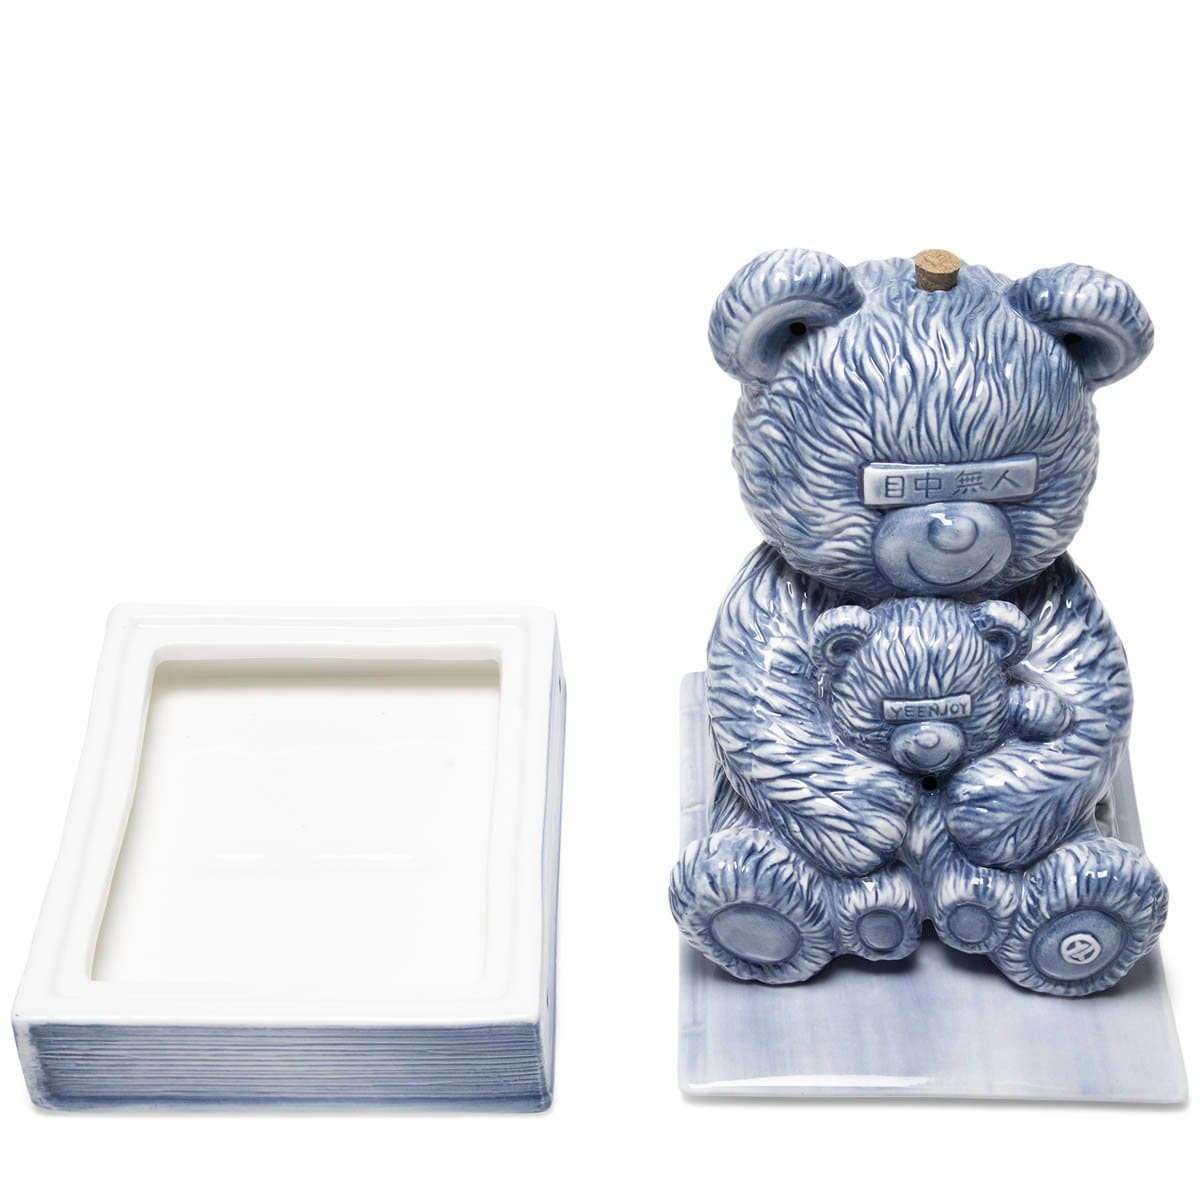 YEENJOY Bags & Accessories PORCELAIN / O/S COVER THE EYES BEAR INCENSE BURNER